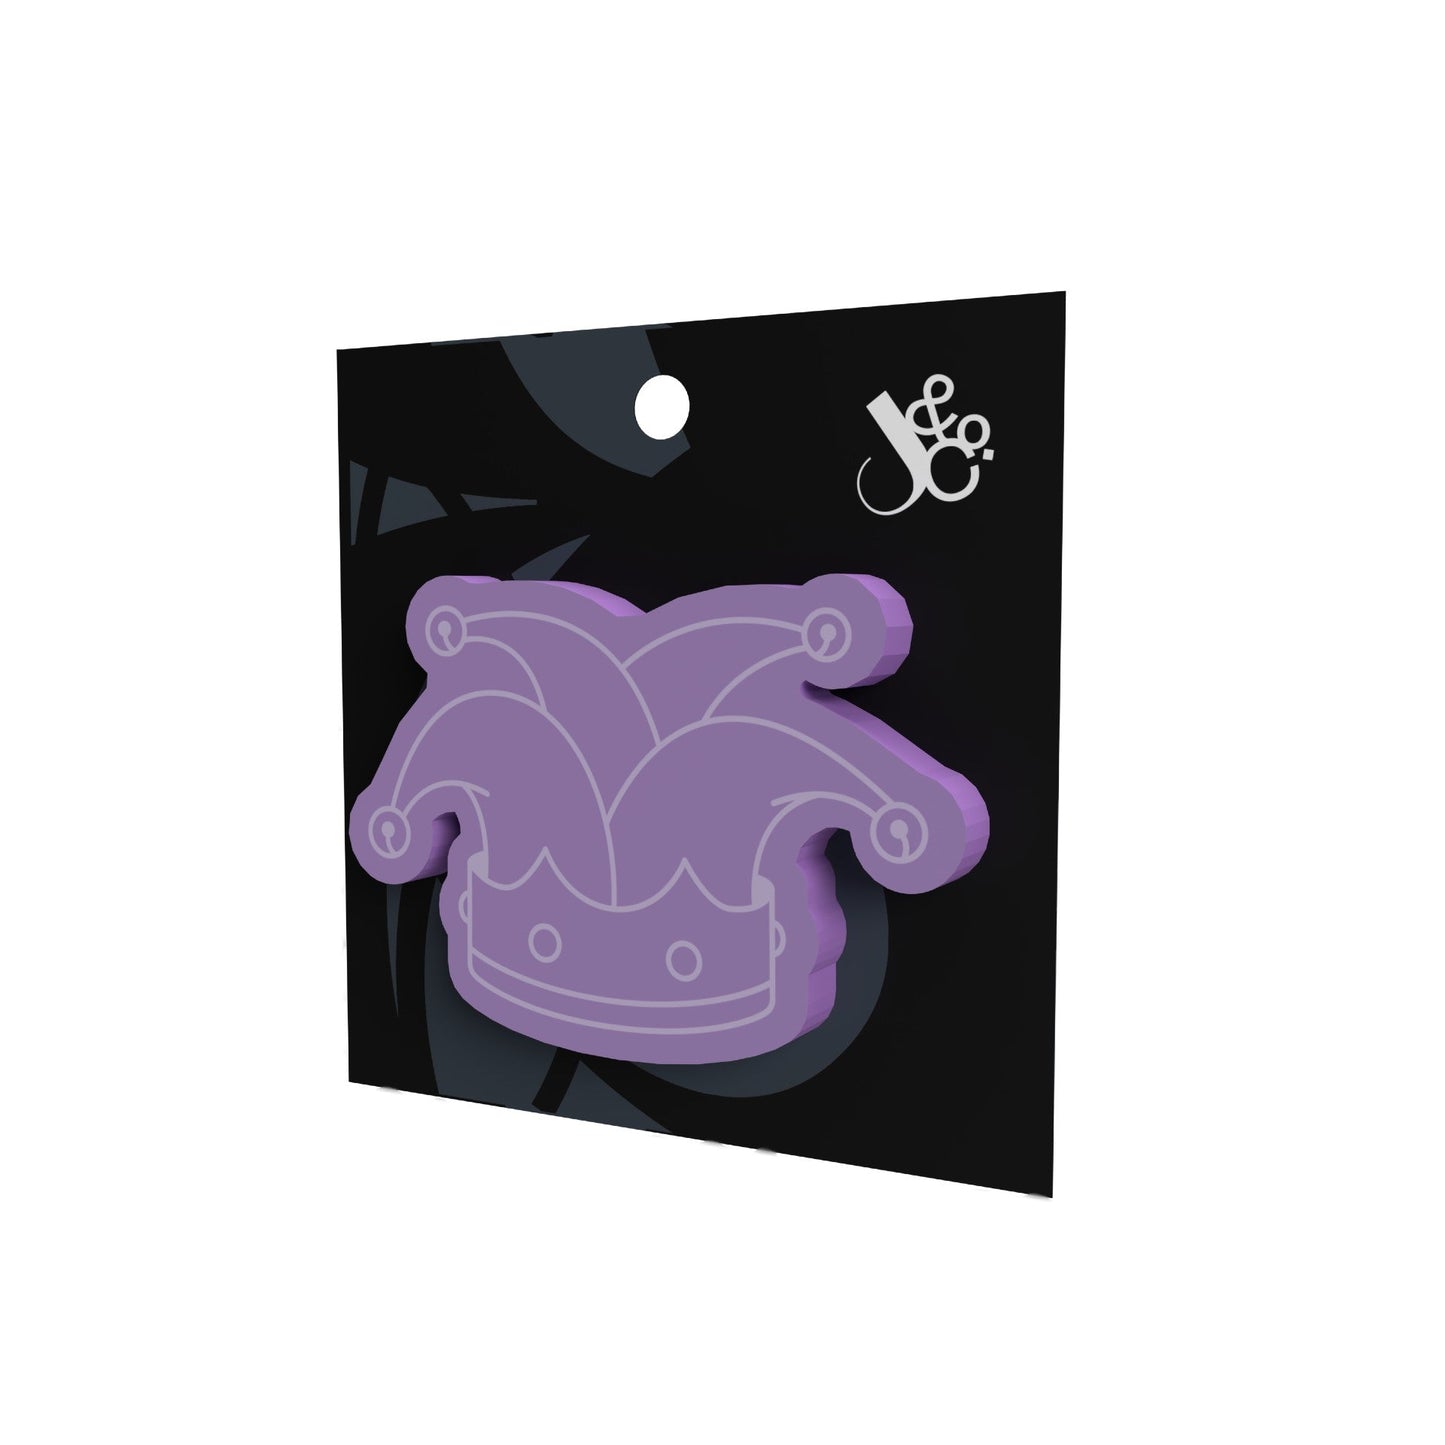 Memorra Sticky Note Pack - Royal Mess Purple